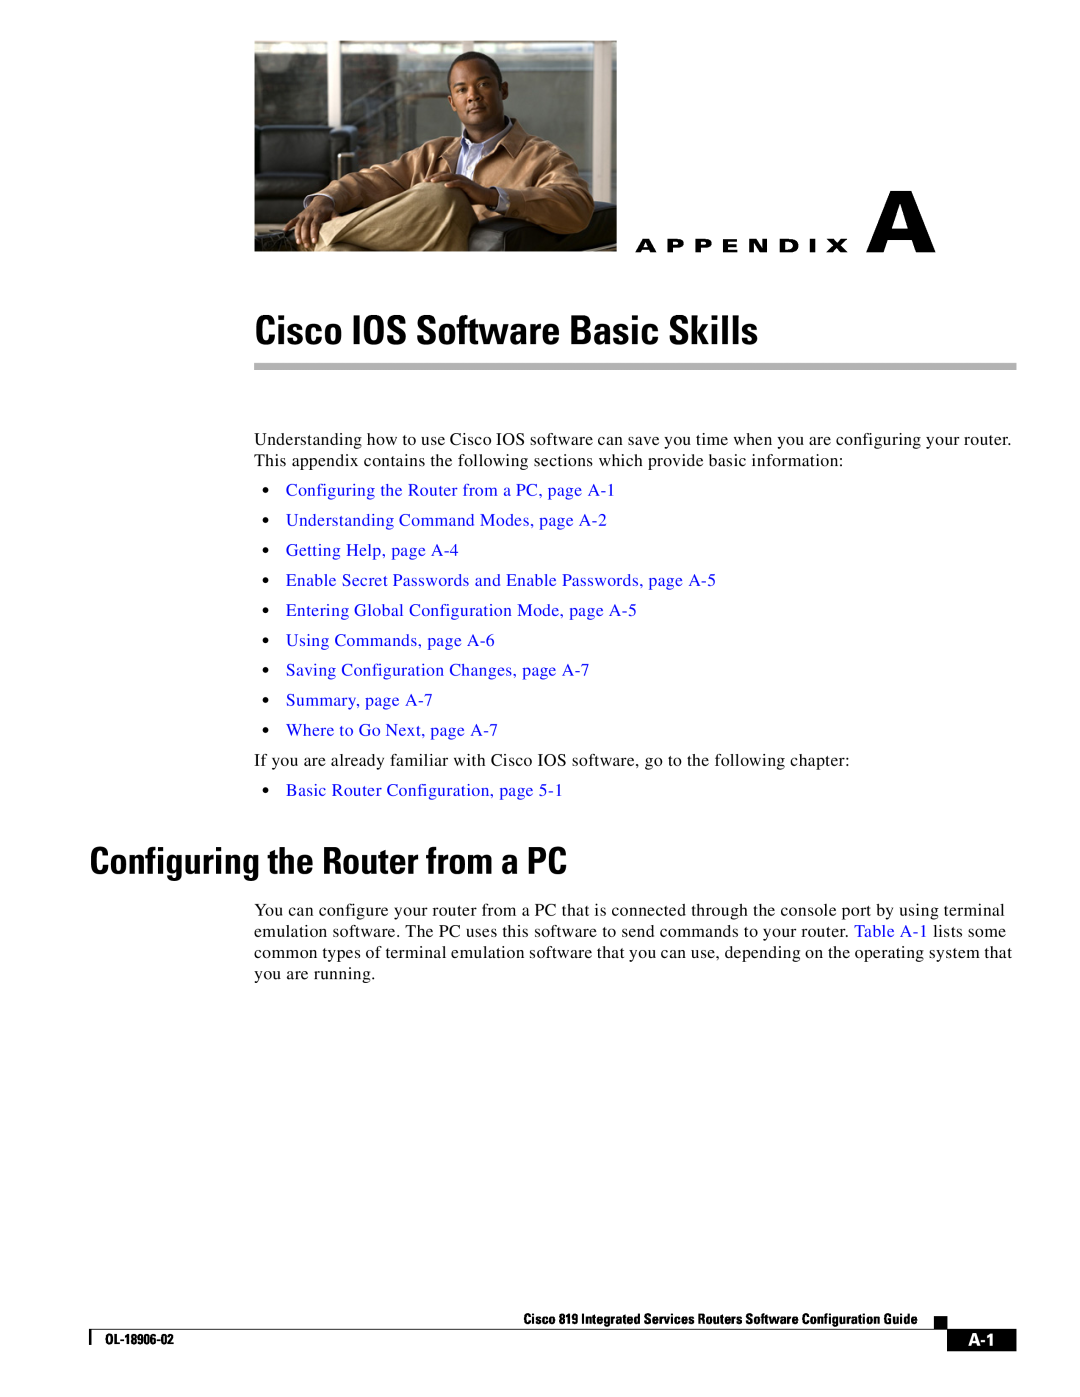 Cisco Systems C819HG4GVK9, C819GUK9 Cisco IOS Software Basic Skills, Configuring the Router from a PC, A P P E N D I X A 